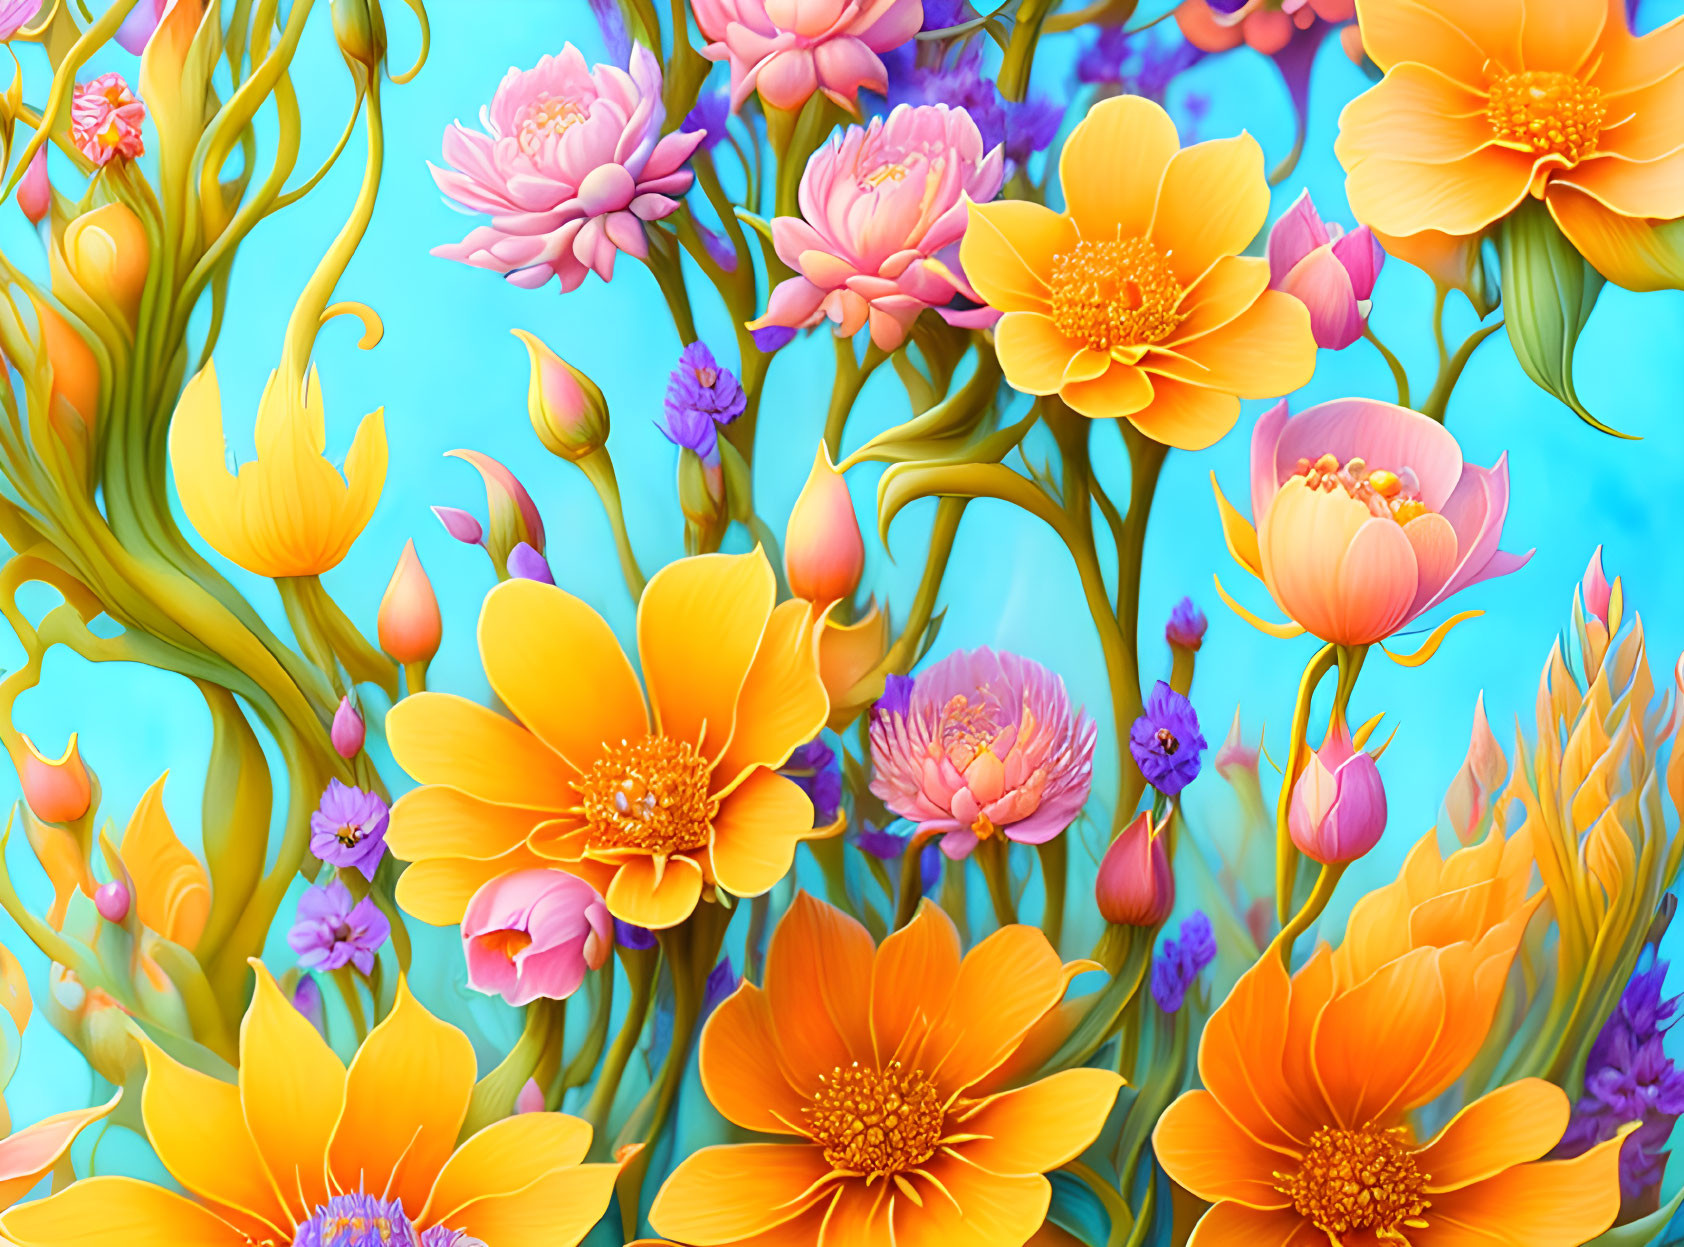 Colorful Digital Art: Yellow and Pink Flowers on Blue Background